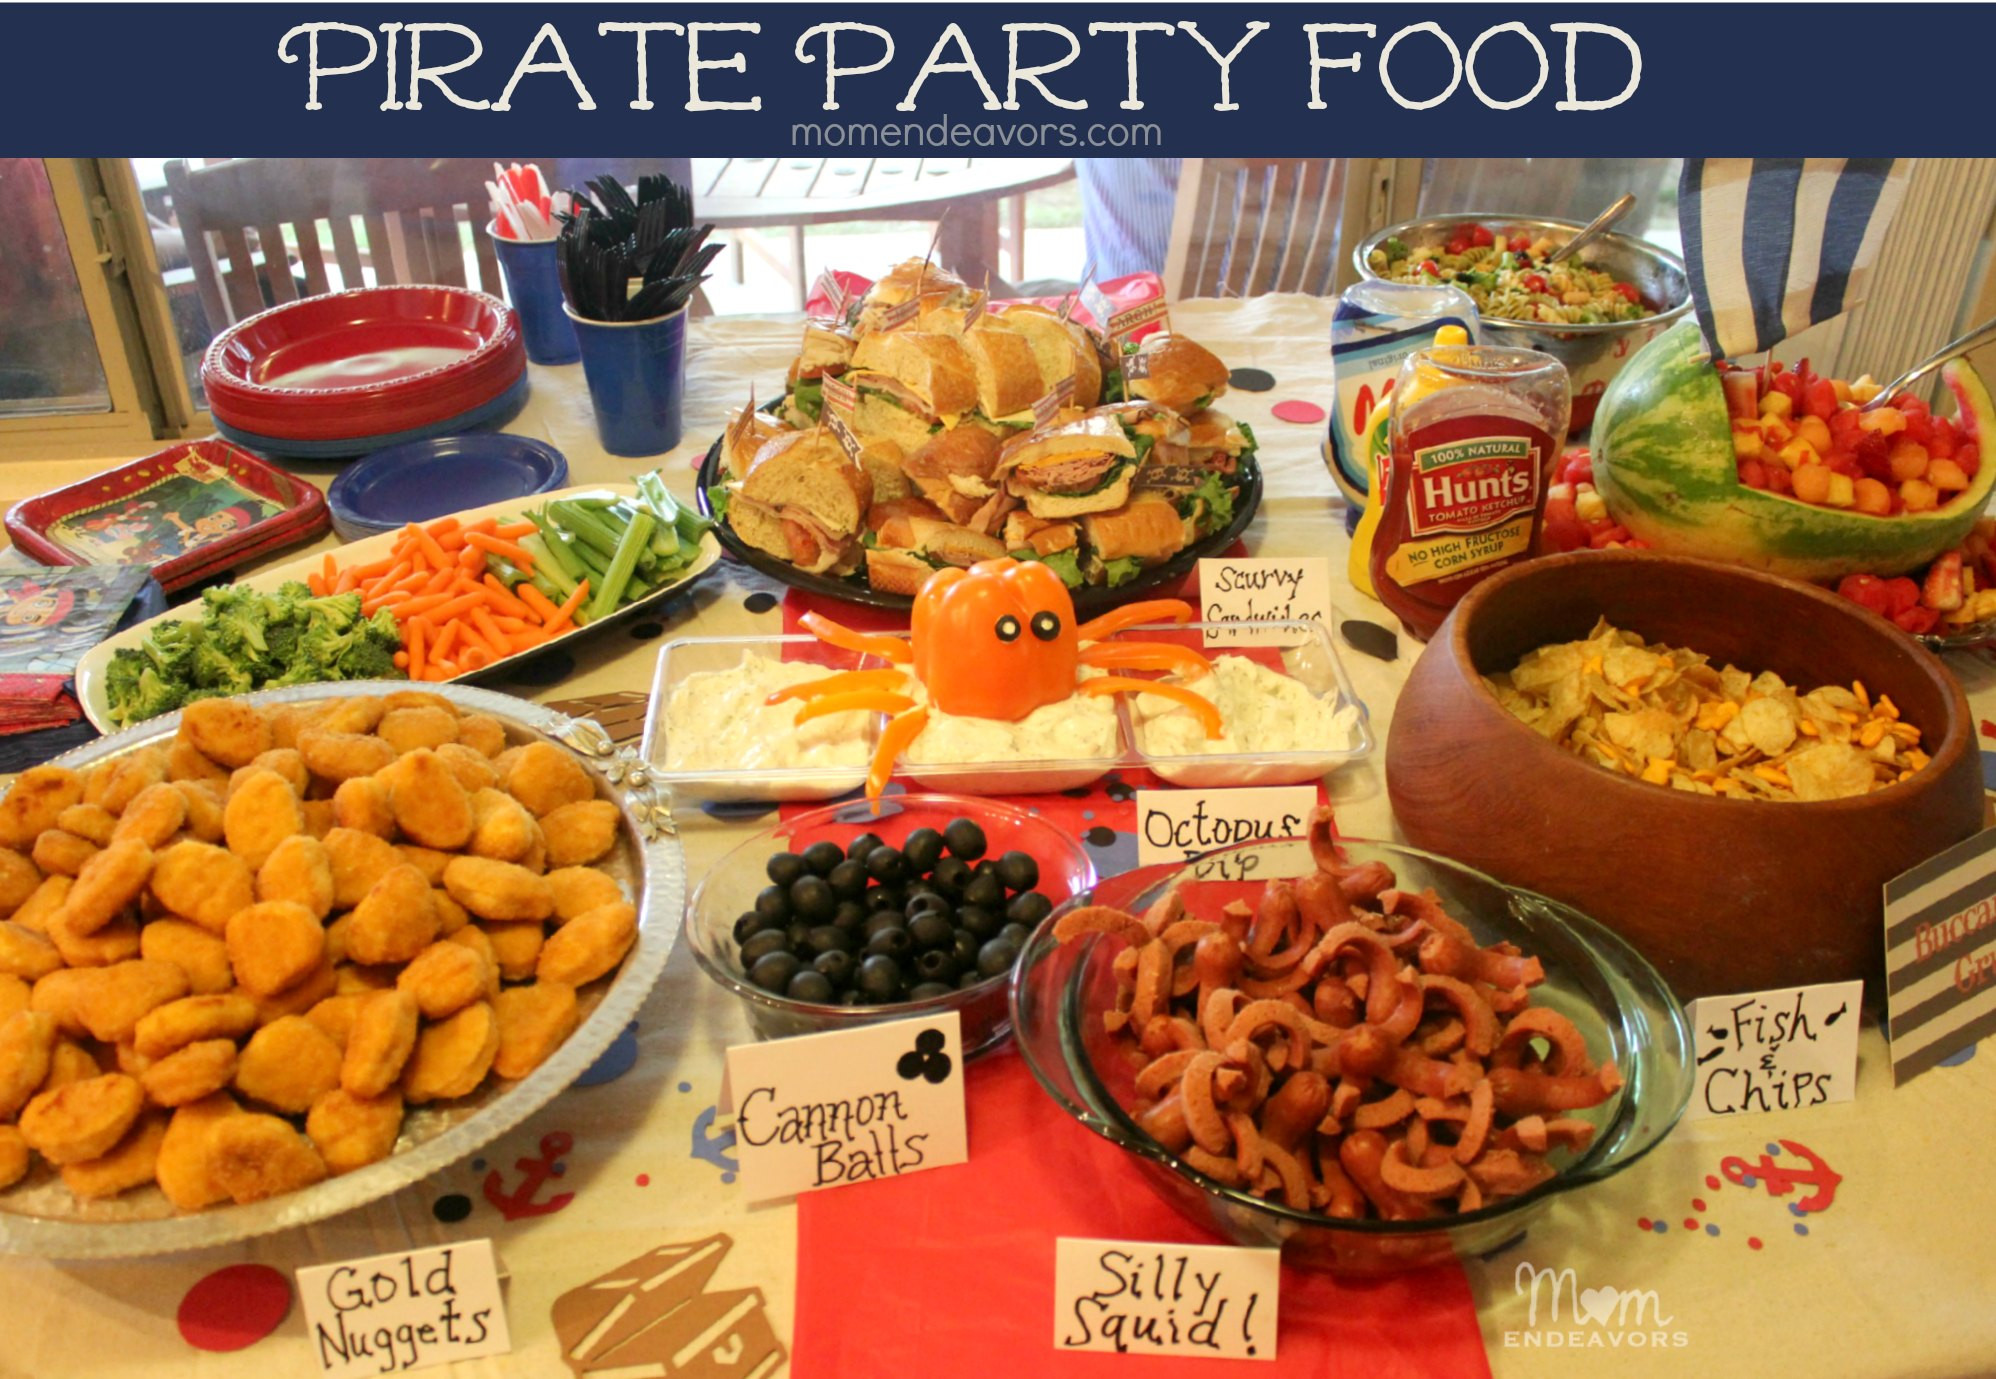 Food Ideas For Kids Birthday Party
 Jake and the Never Land Pirates Birthday Party Food